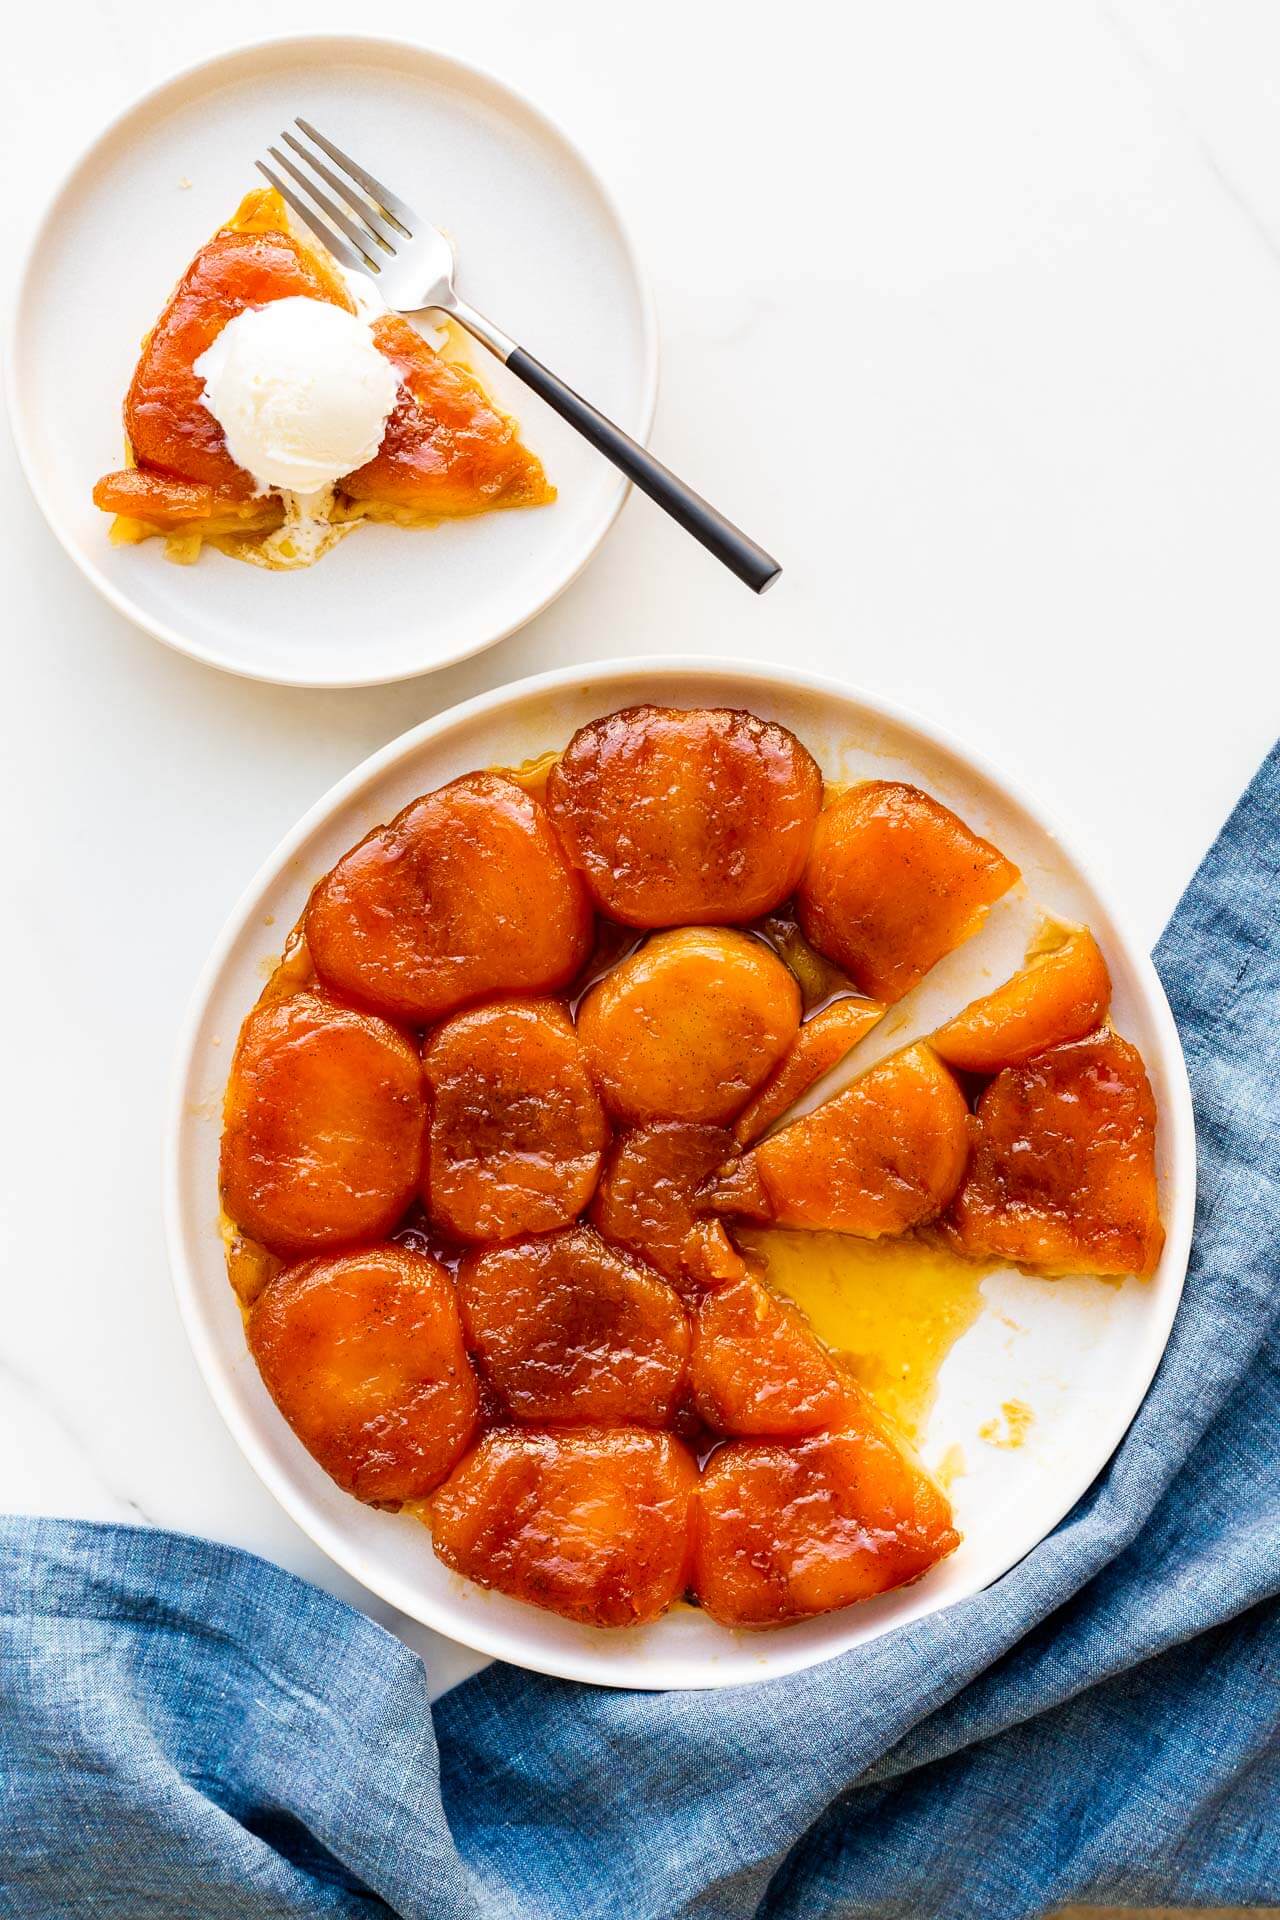 Serving a slice of apple tarte tatin on a plate with a scoop of ice cream.